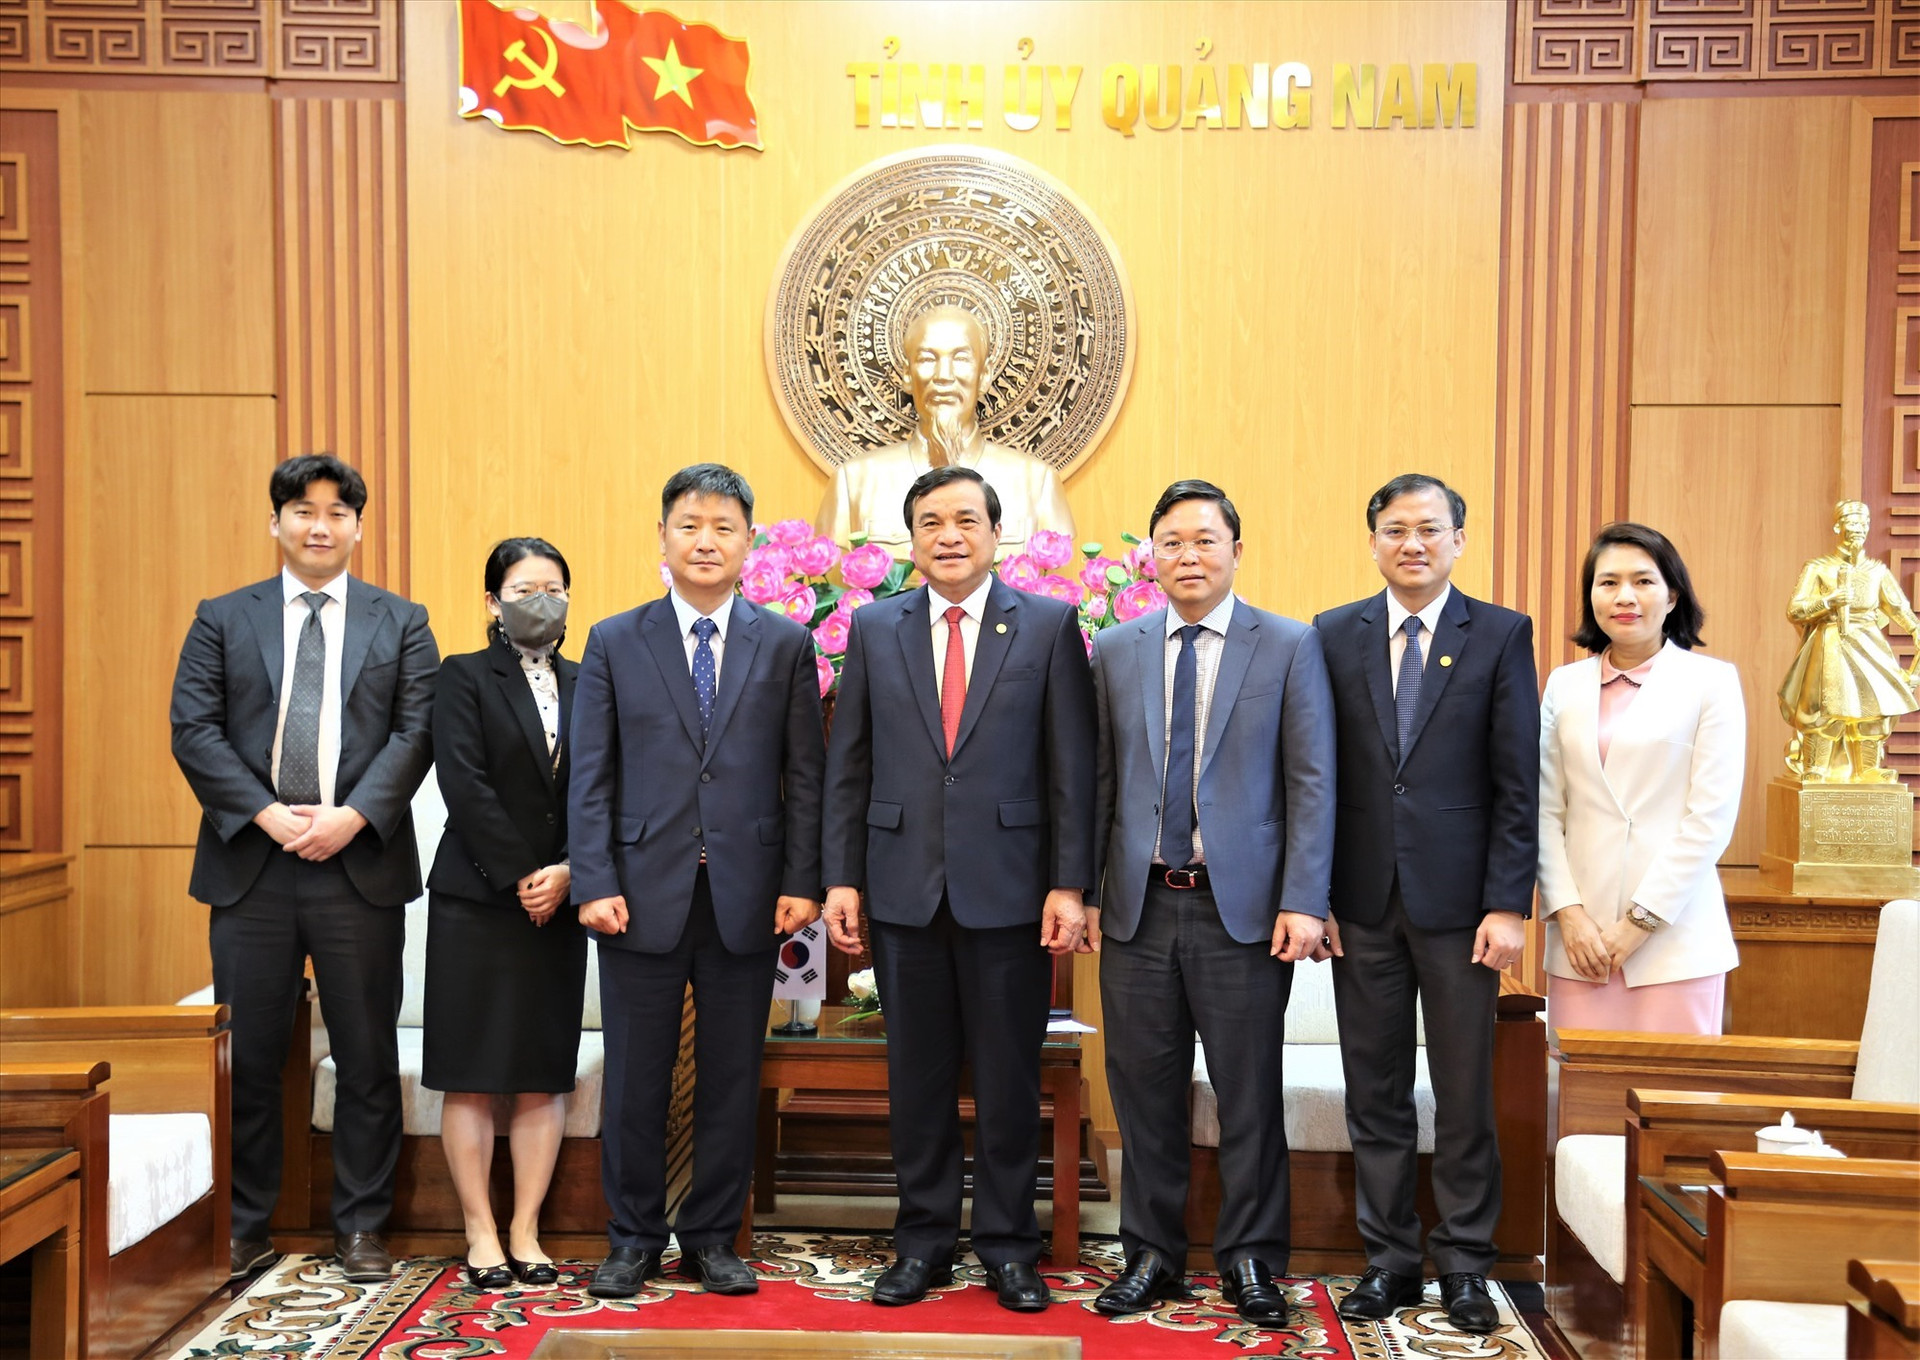 The delegation from South Korean Consulate General and Quang Nam leaders